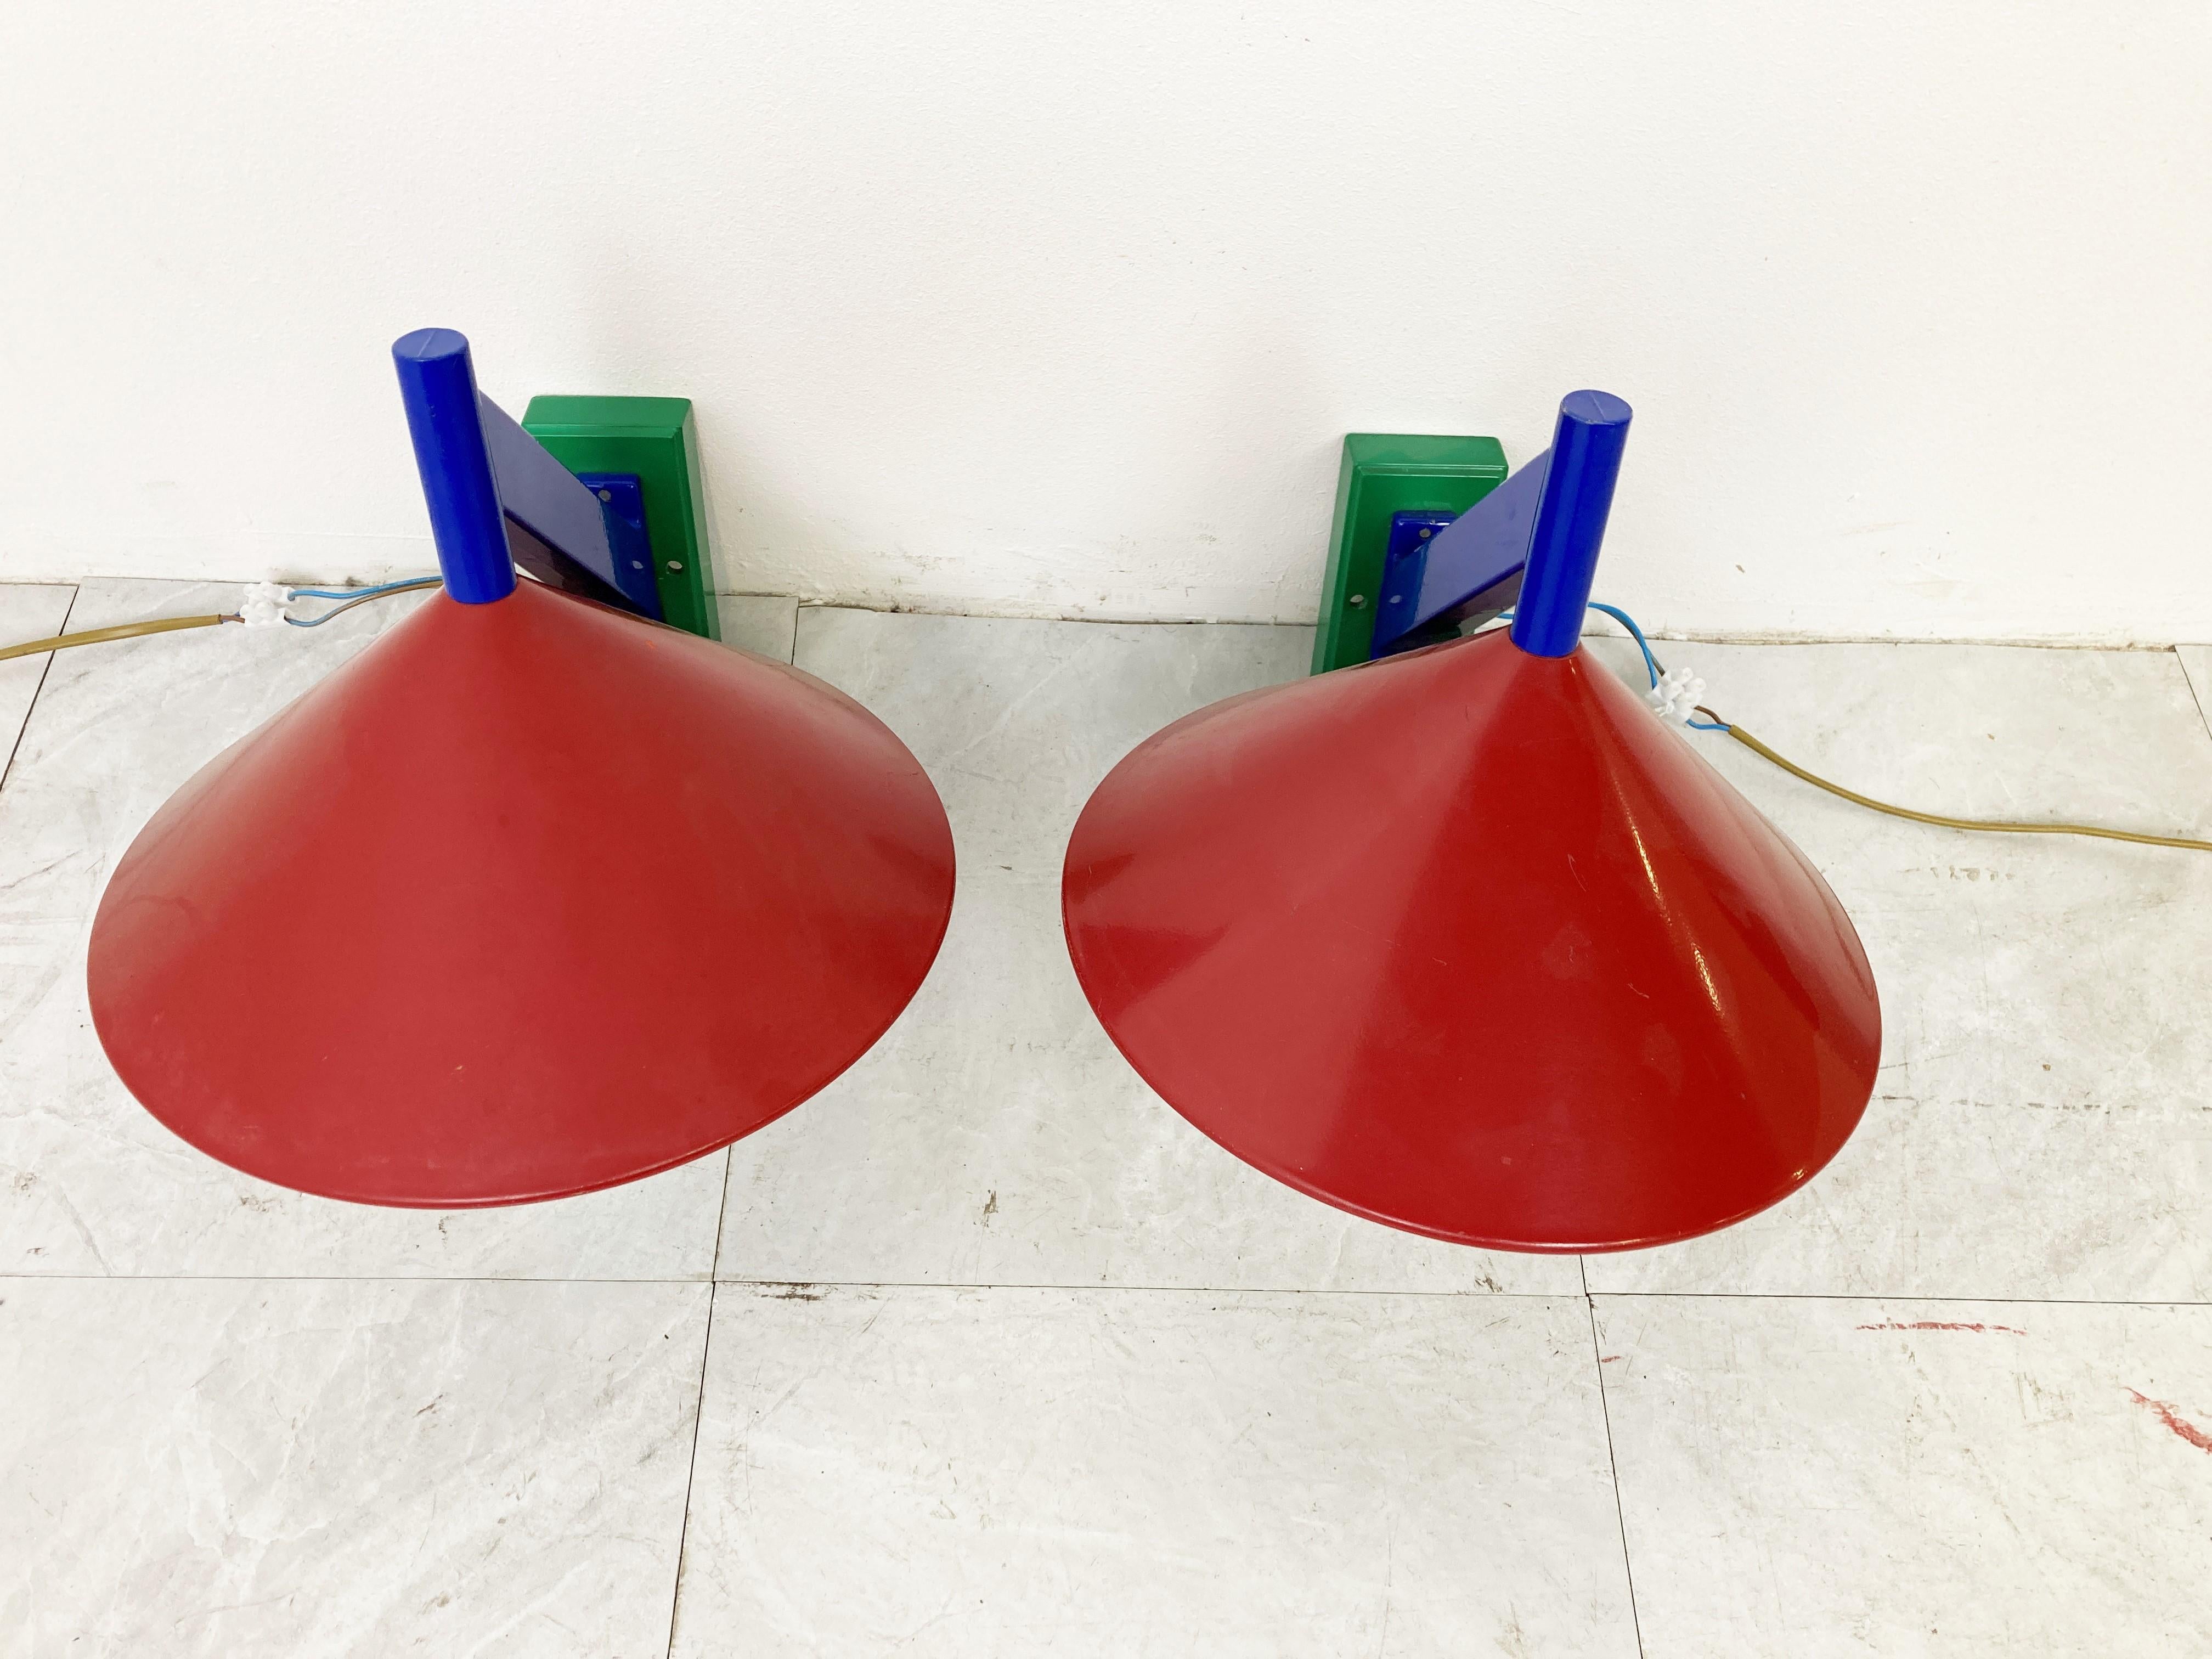 Pair of memphis style colourful opaline wall lamps.

The lamps emits a soft light thanks to the opaline shades.

Good condition, tested and ready to use. 

1980s - Belgium

Dimensions:
Height: 32cm/12.59